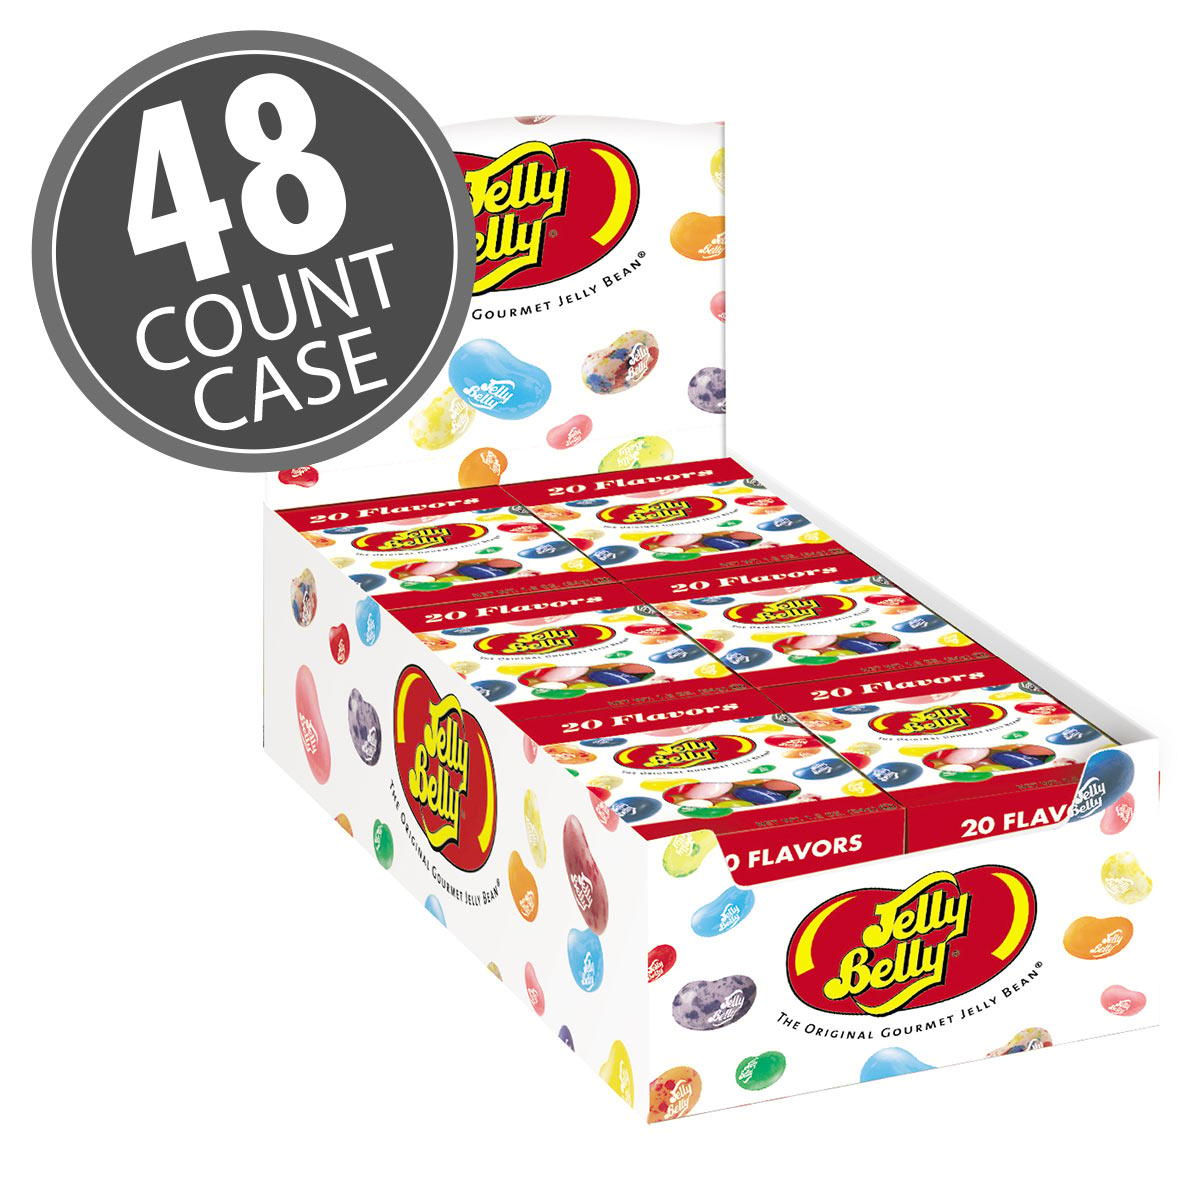 20 Assorted Jelly Bean Flavors - 1.2 oz Flip Top boxes 48-Count Case